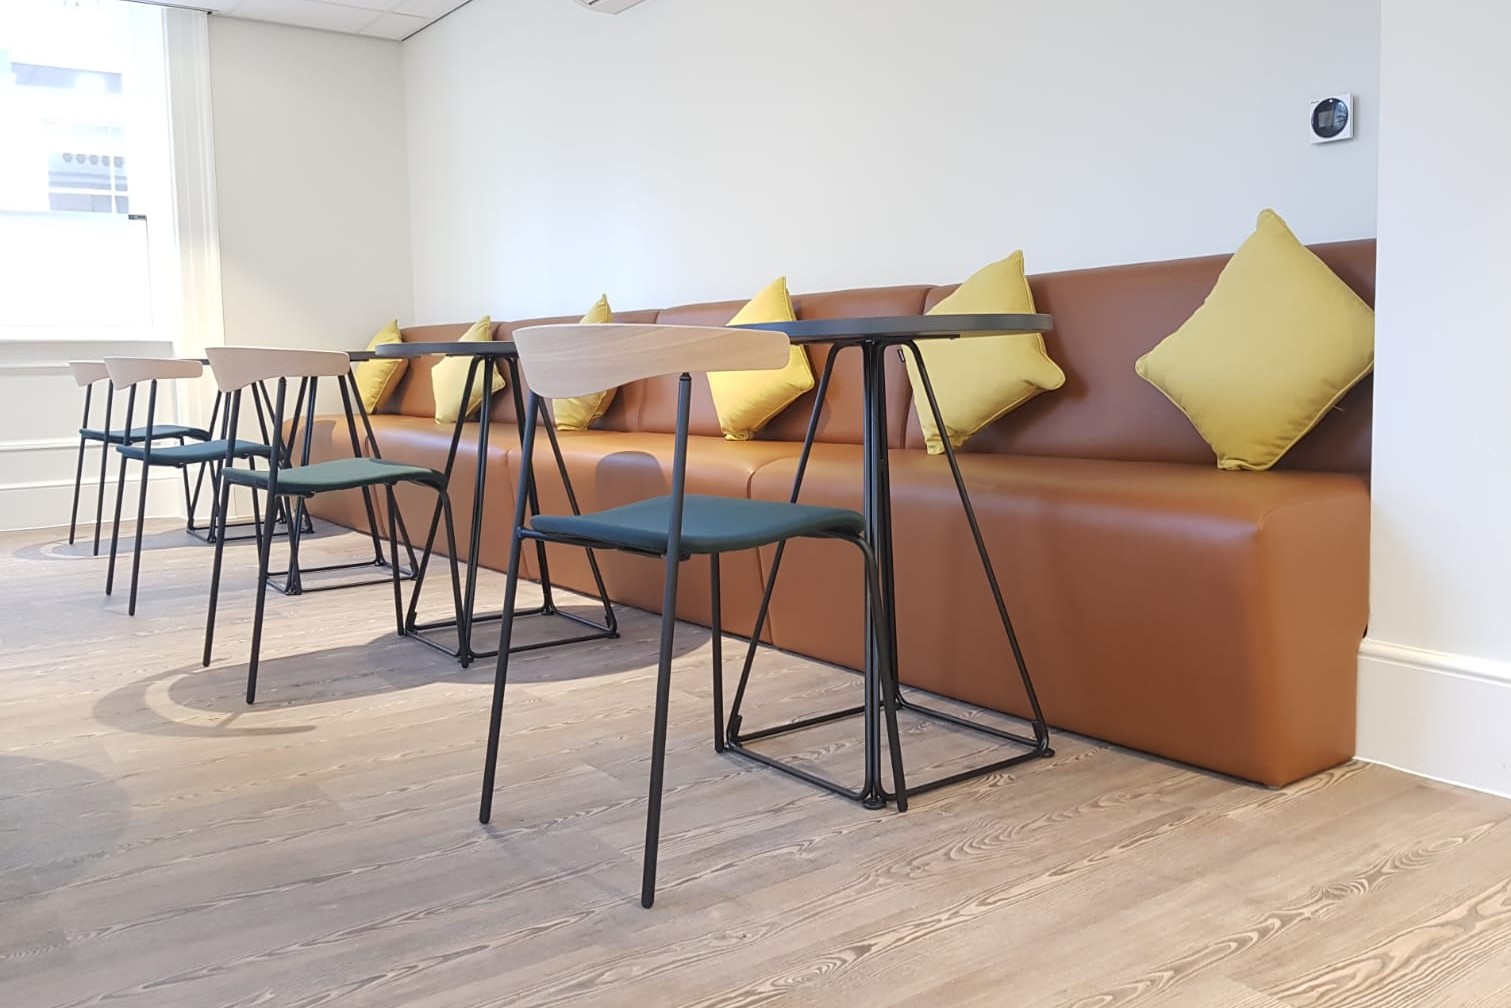 Banquette Seating And Cafe Furniture London